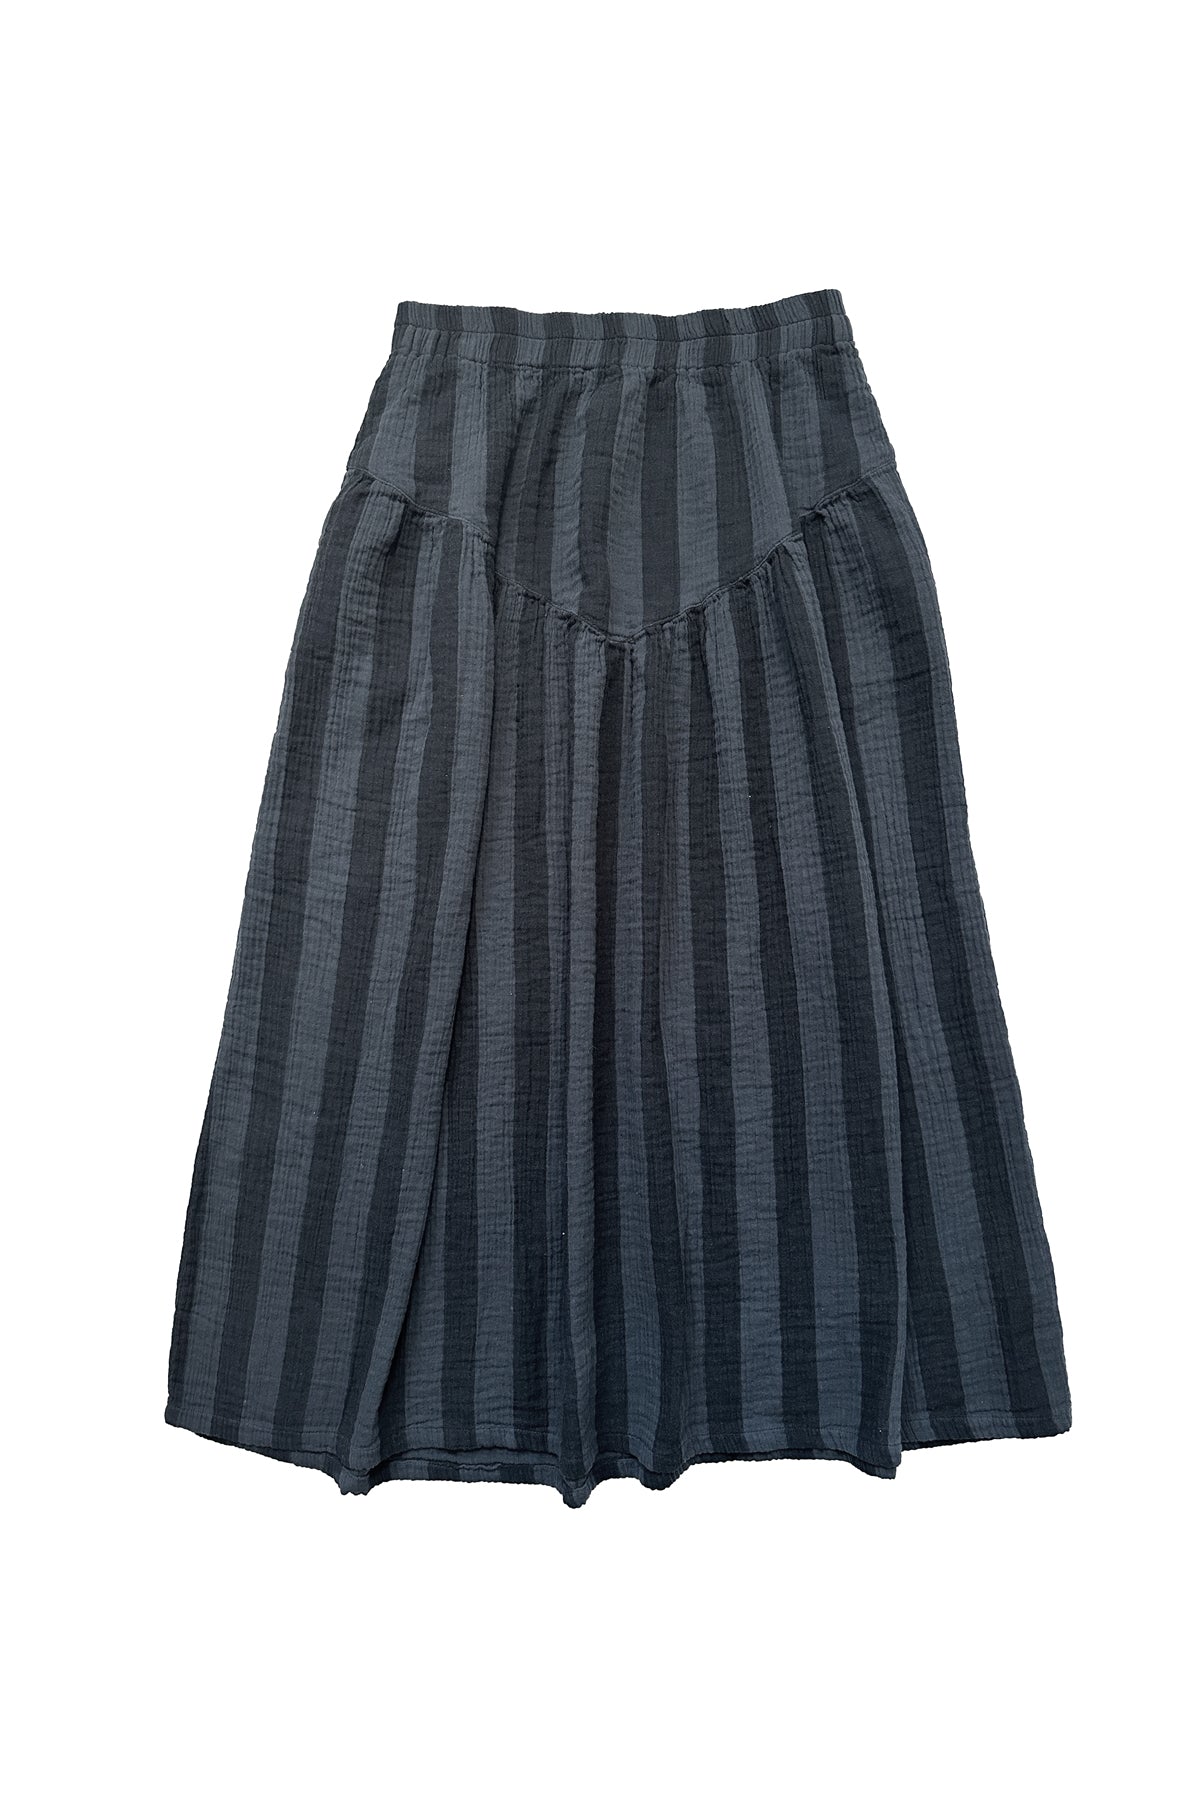 The Jessie Skirt | Curator SF | Responsibly Made Clothing